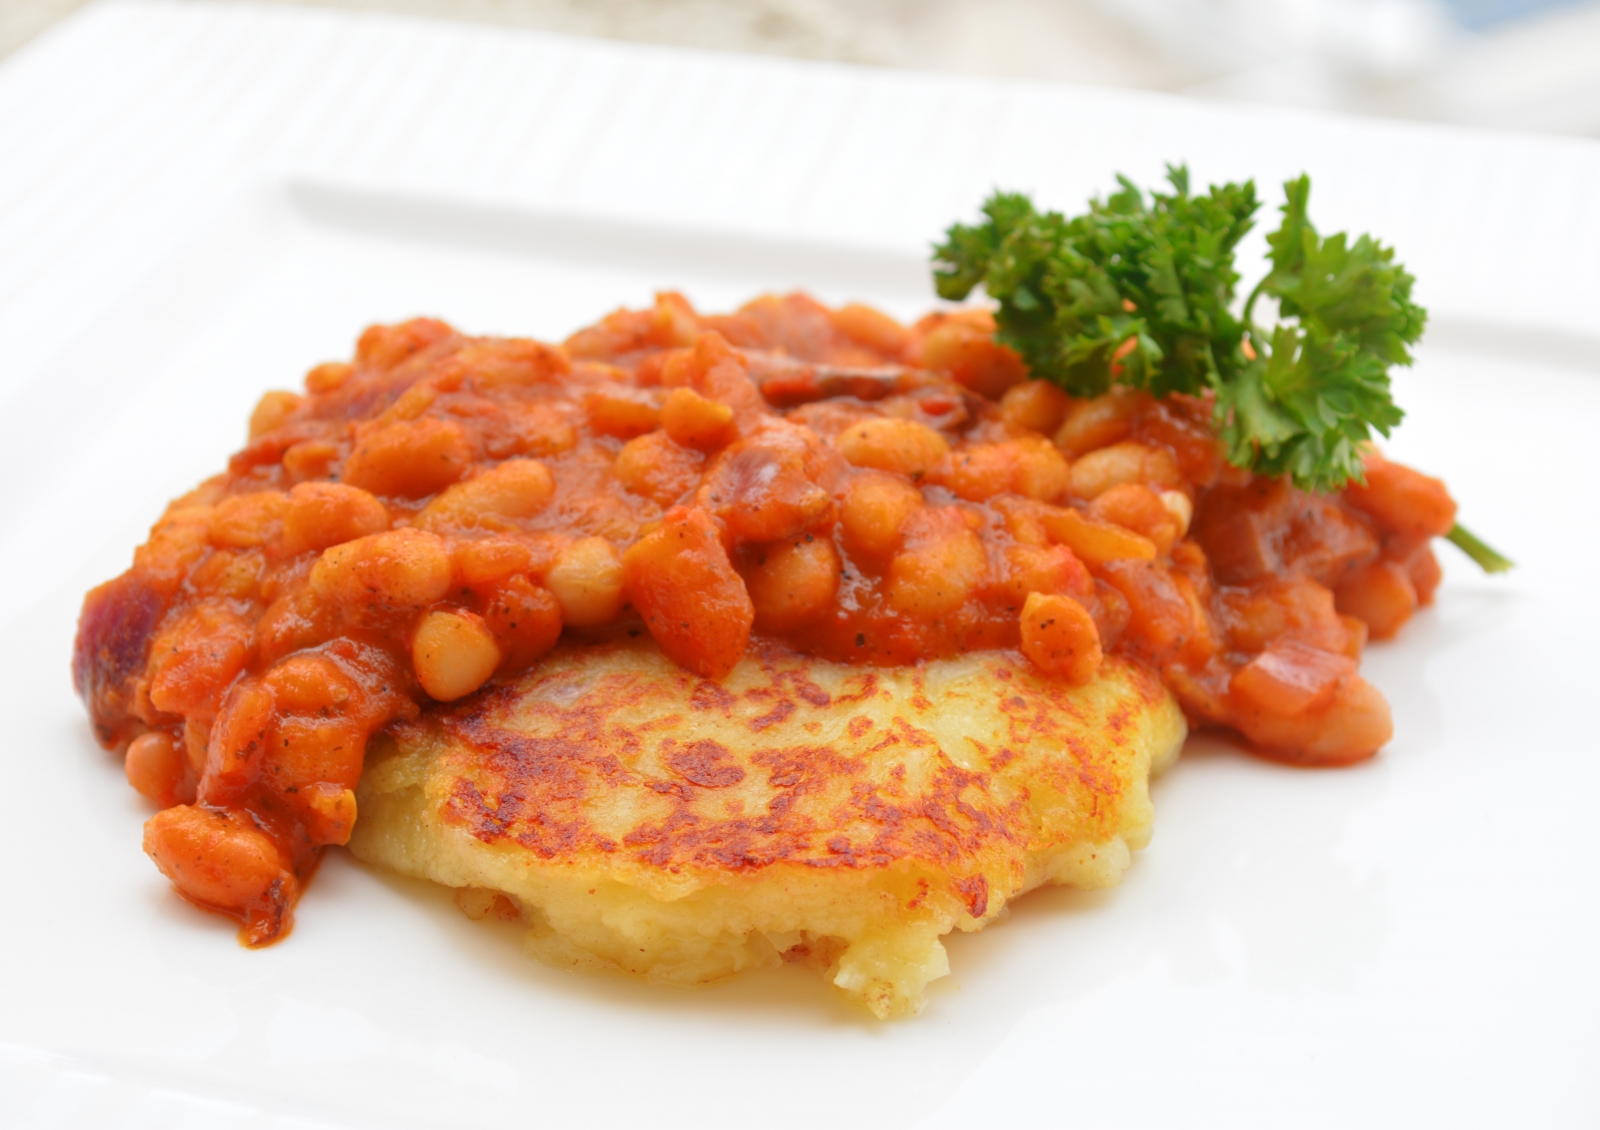 Spicy Baked Beans With Potato Cakes Recipe